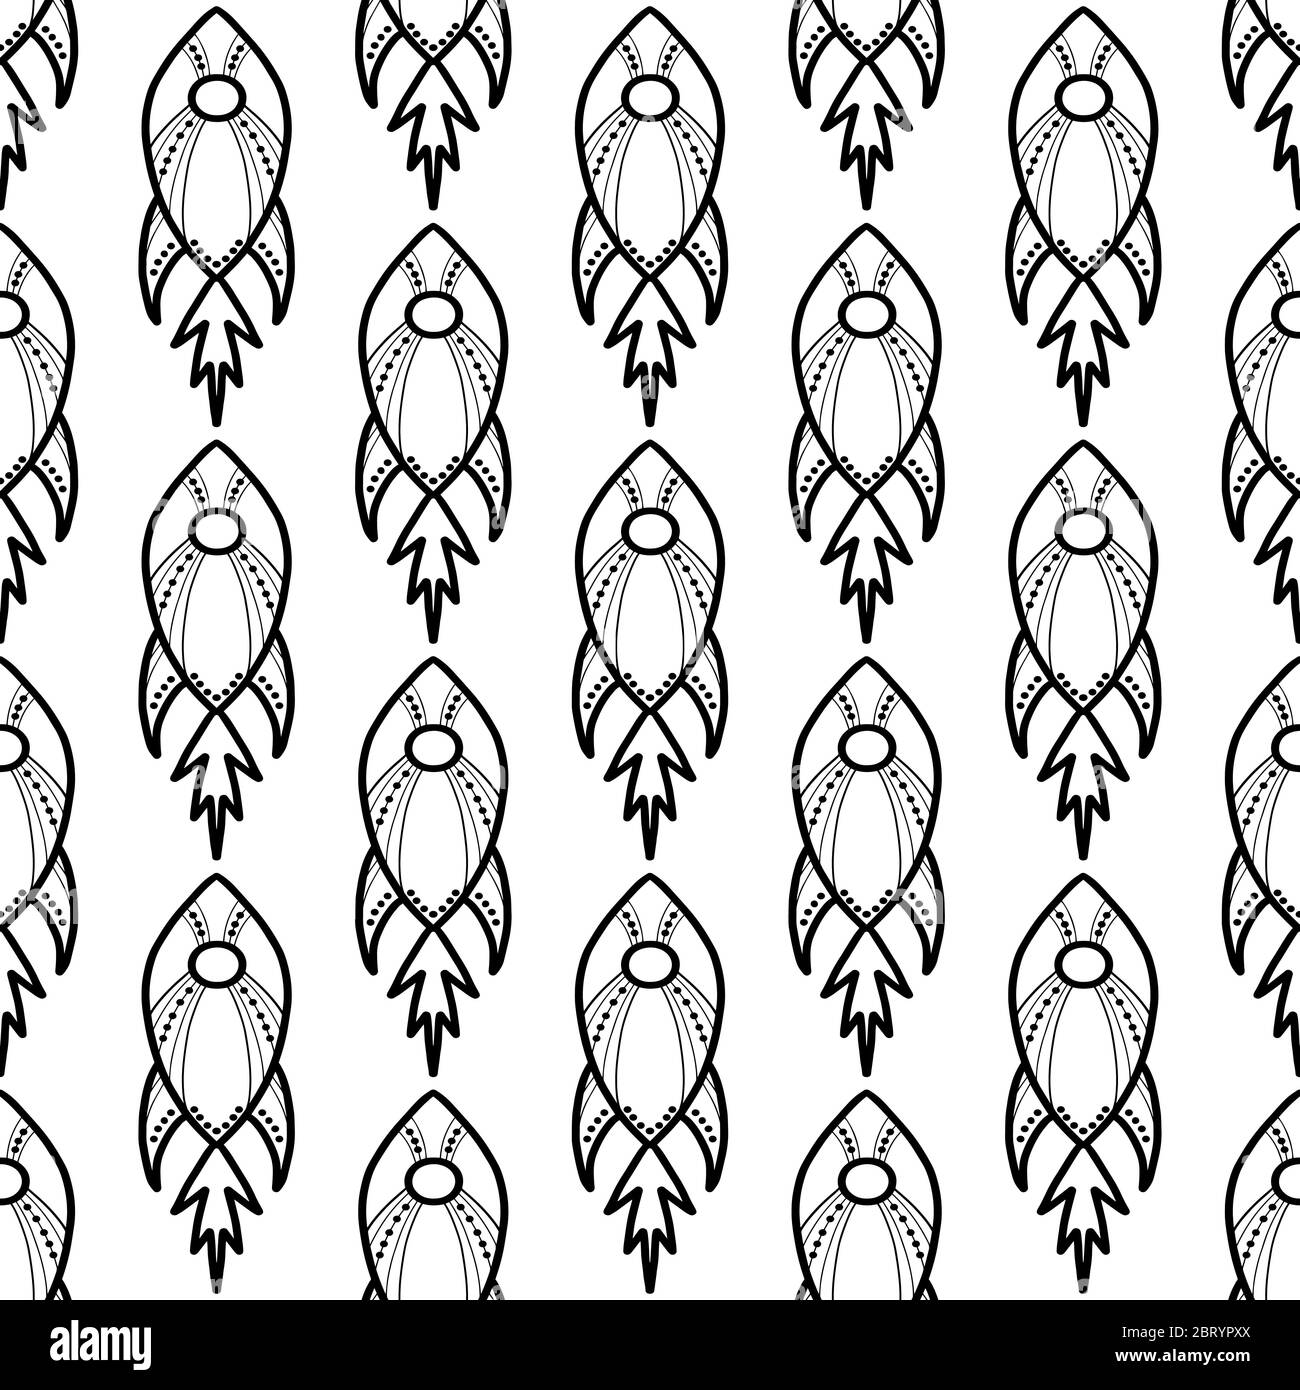 Seamless pattern made with doodle rockets. Isolated on white background. Vector stock illustration. Stock Vector